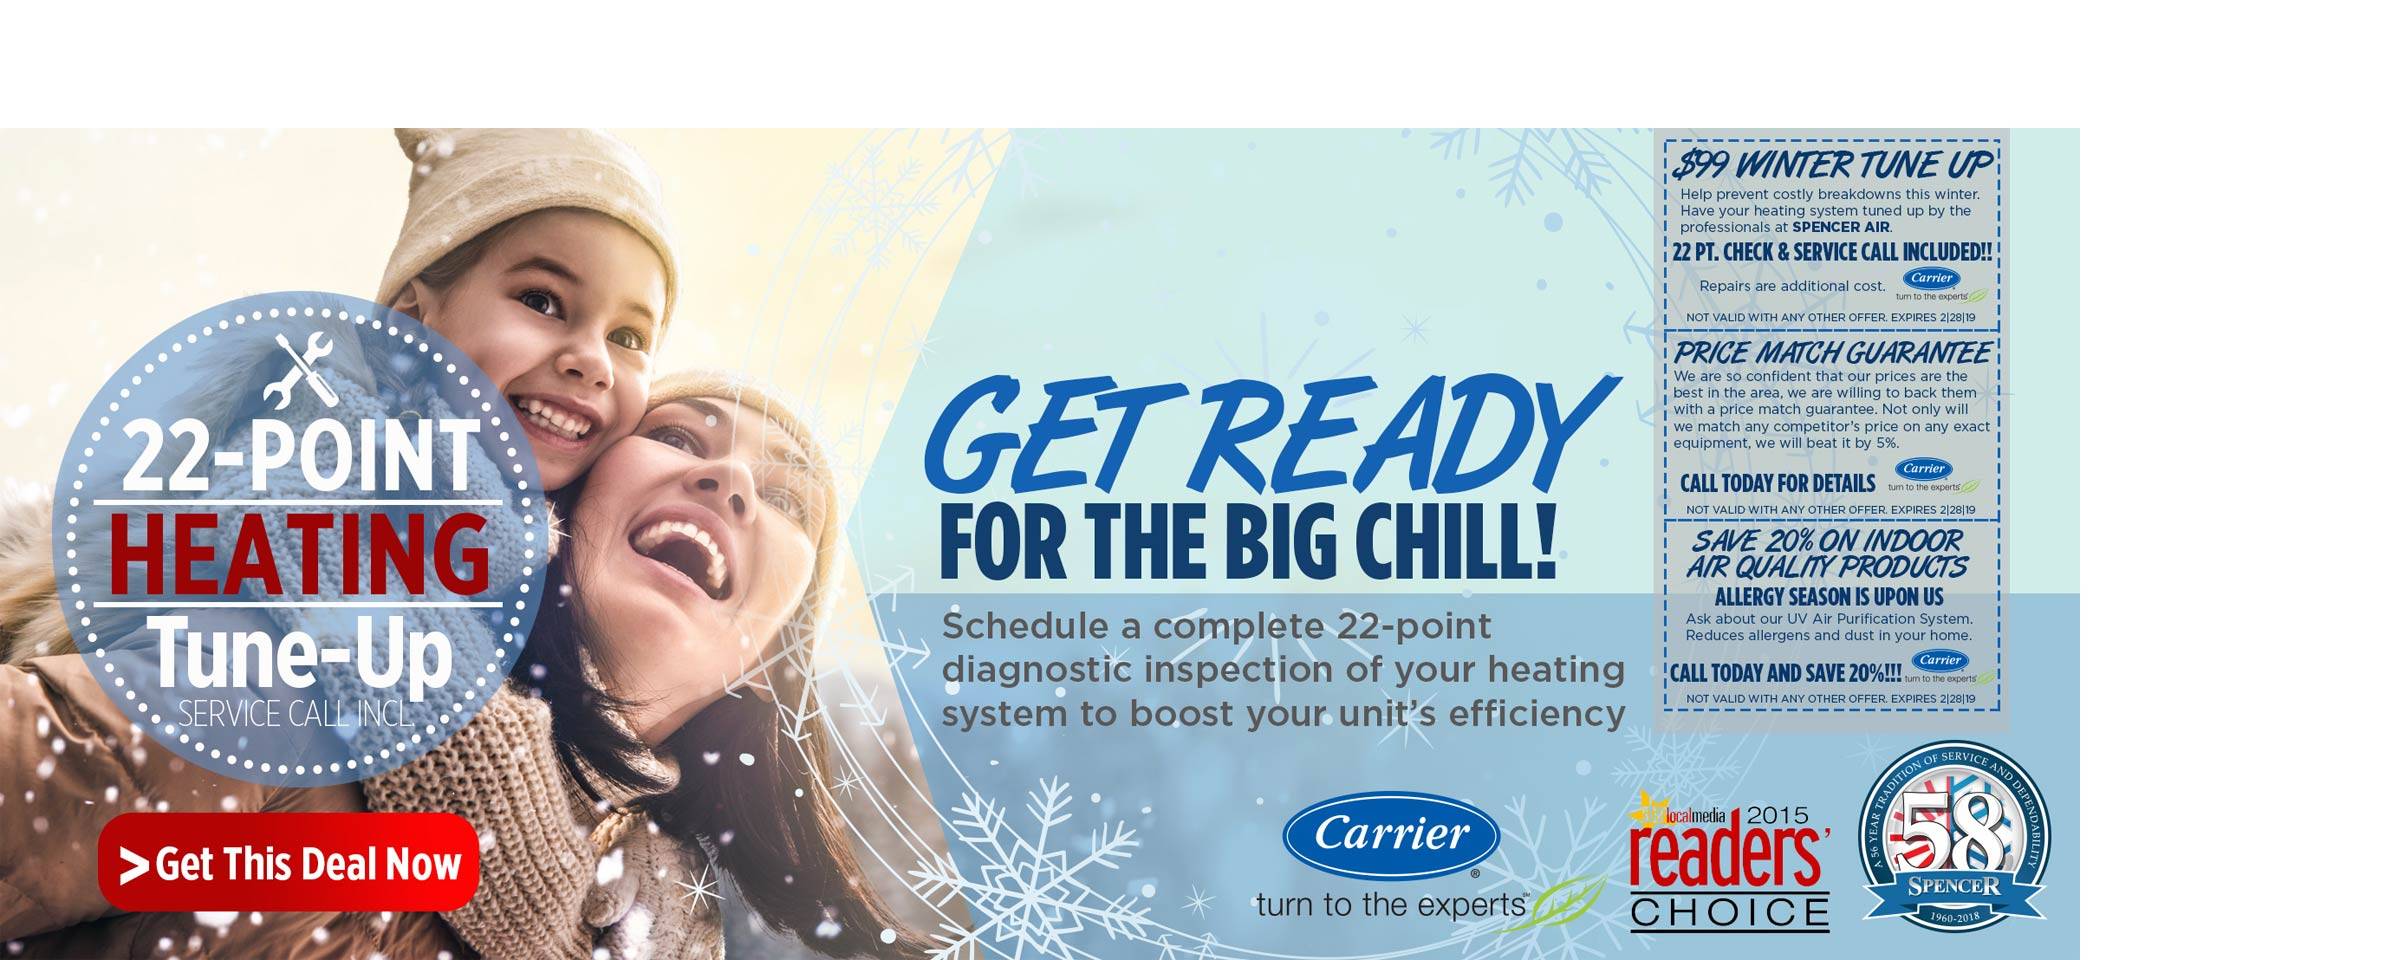 get ready for the big chill 22 point heating tune-up best deal